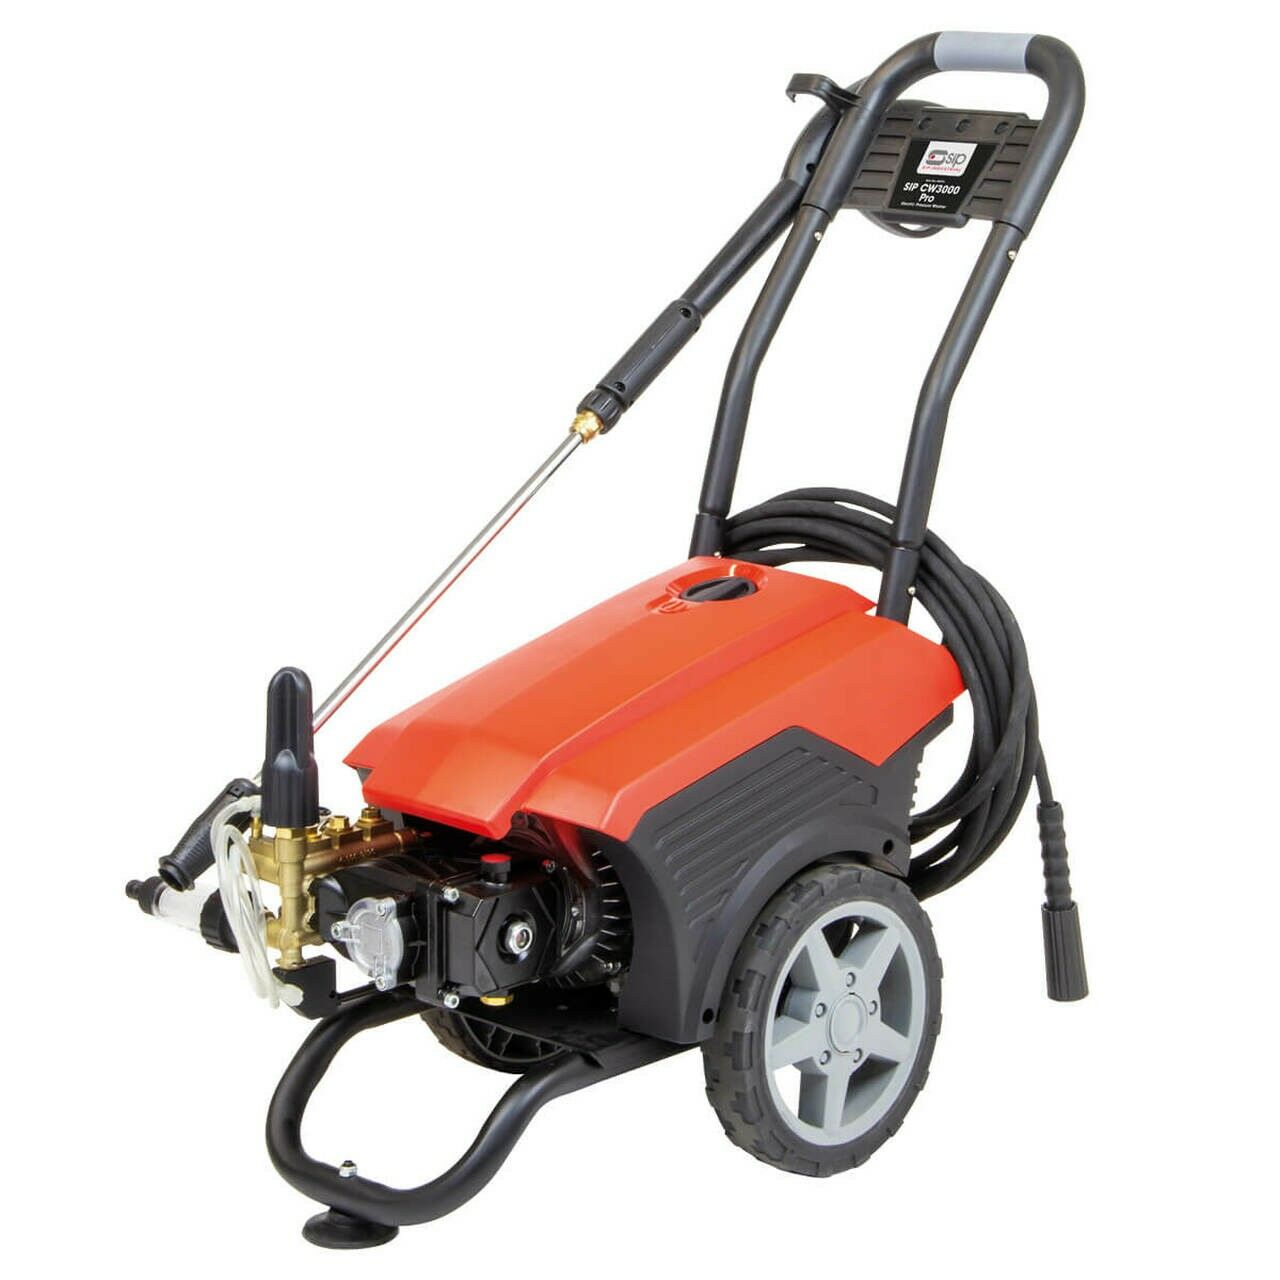 SIP 08976 CW3000 Pro Electric Cold Water Pressure Washer